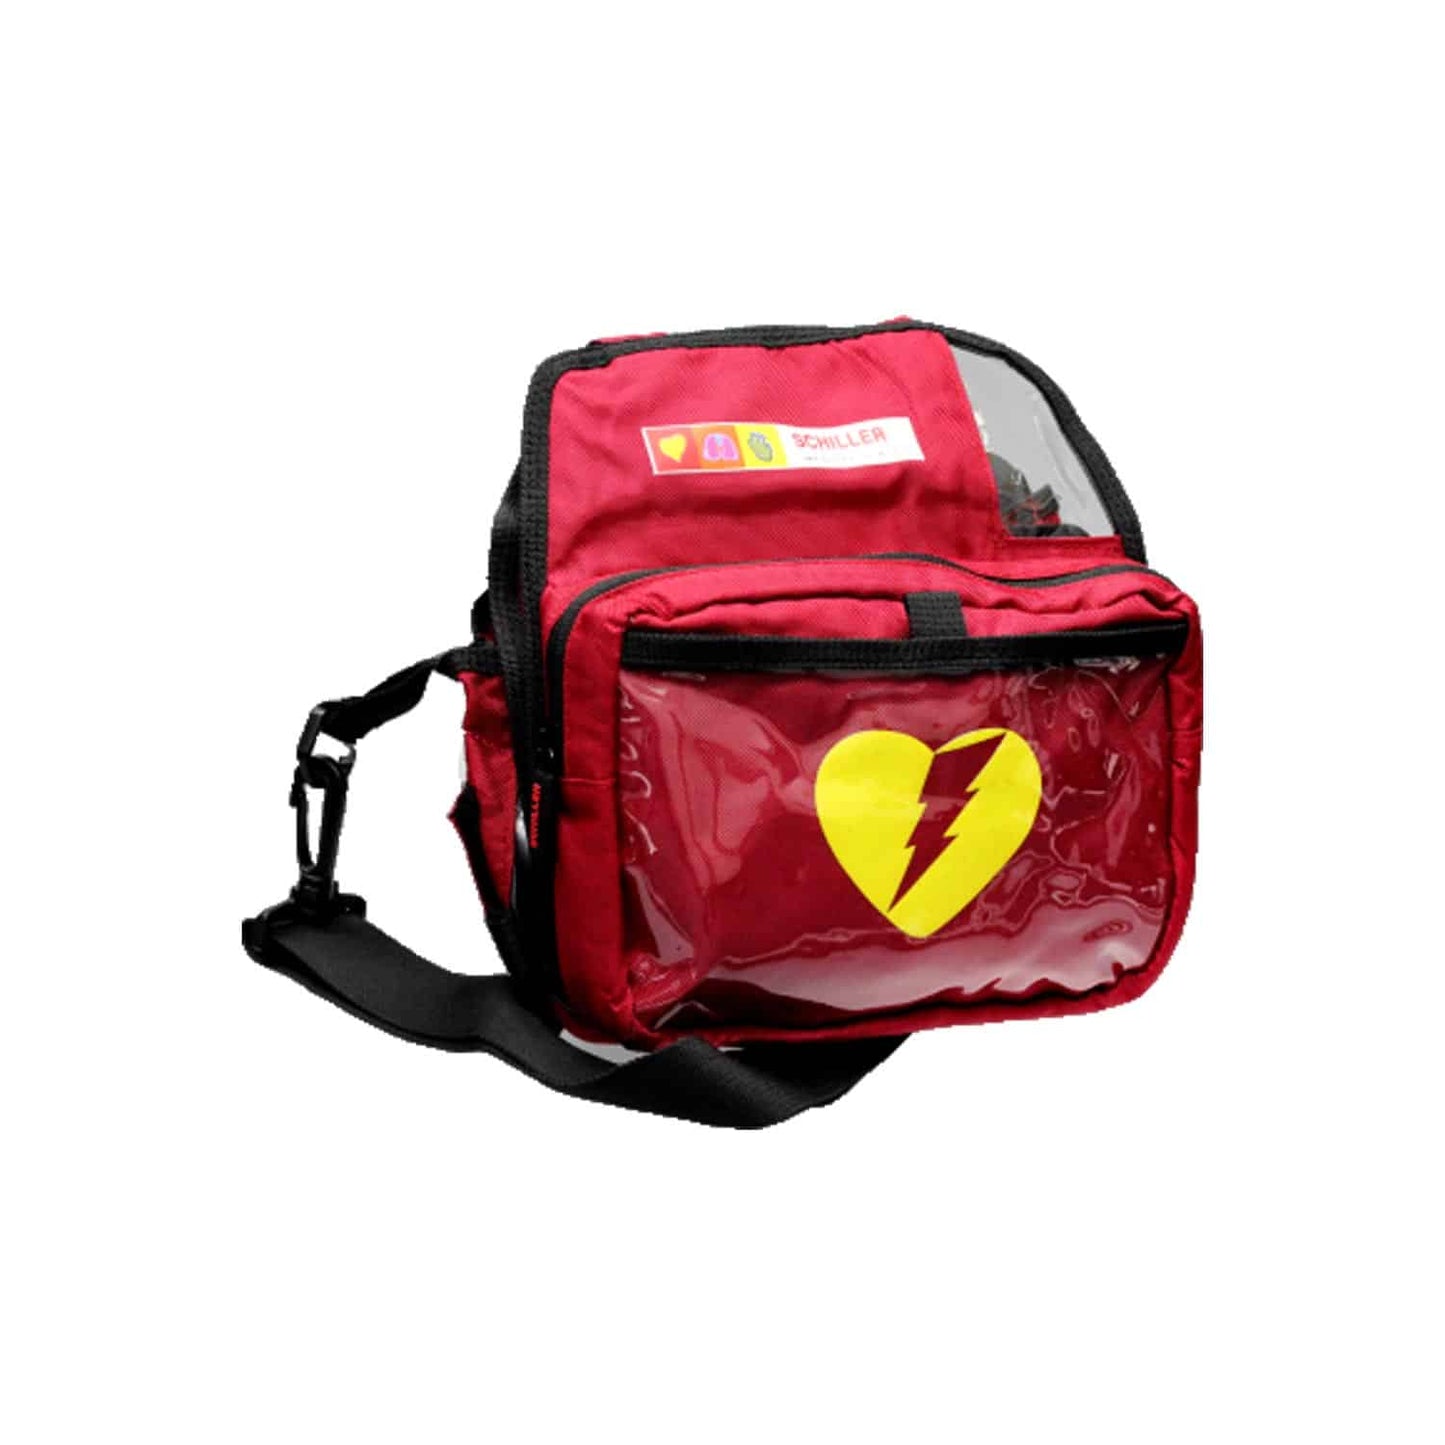 Fred Easyport Plus Device Protective Carry Bag From Schiller